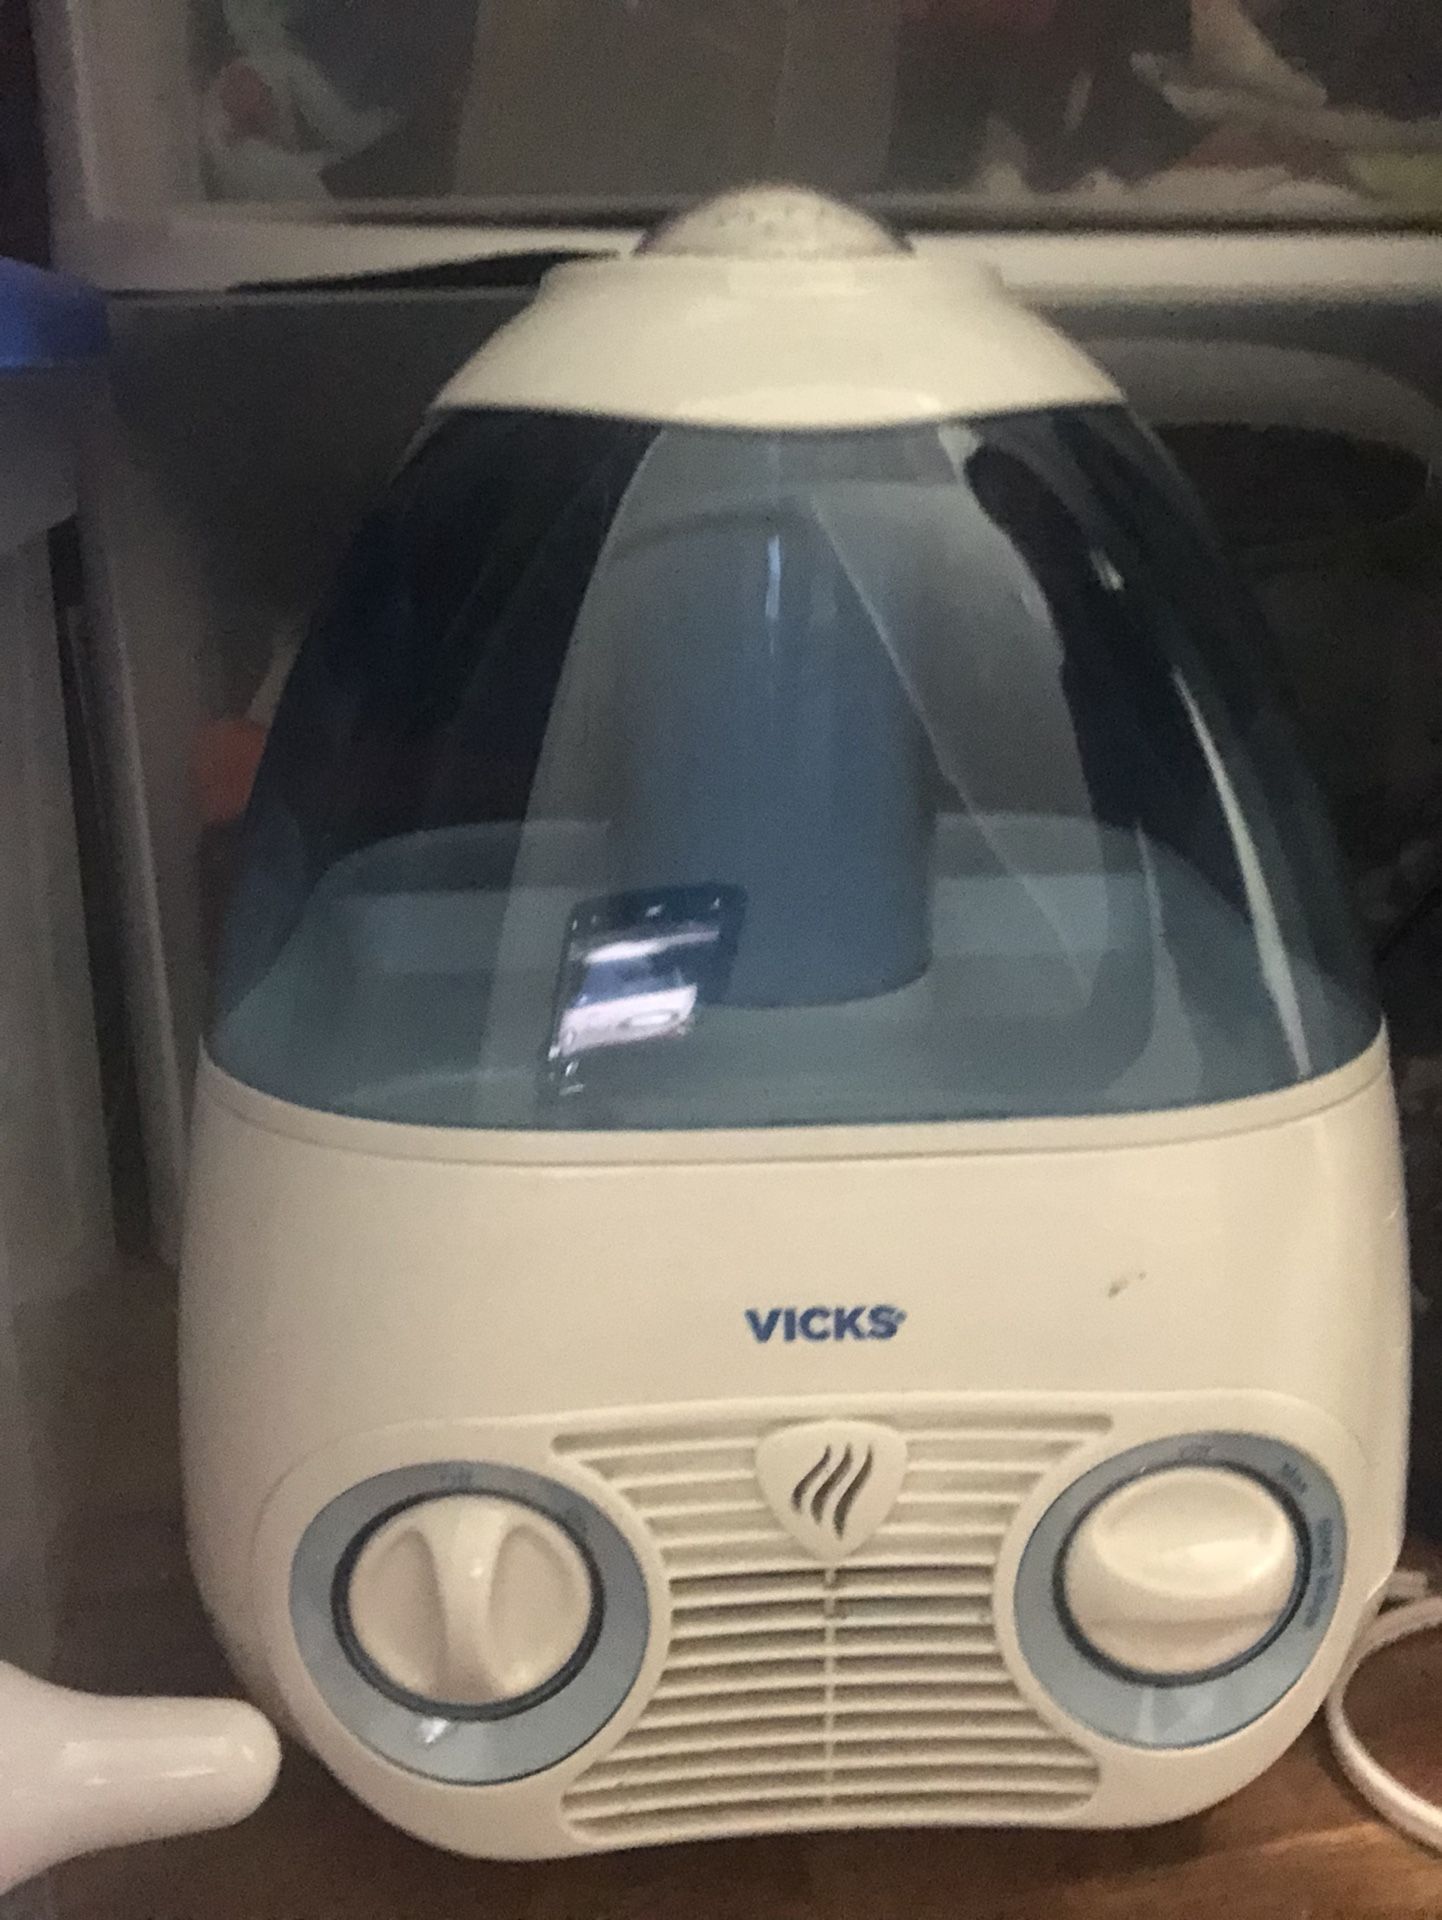 Vicks Humidifier with filters